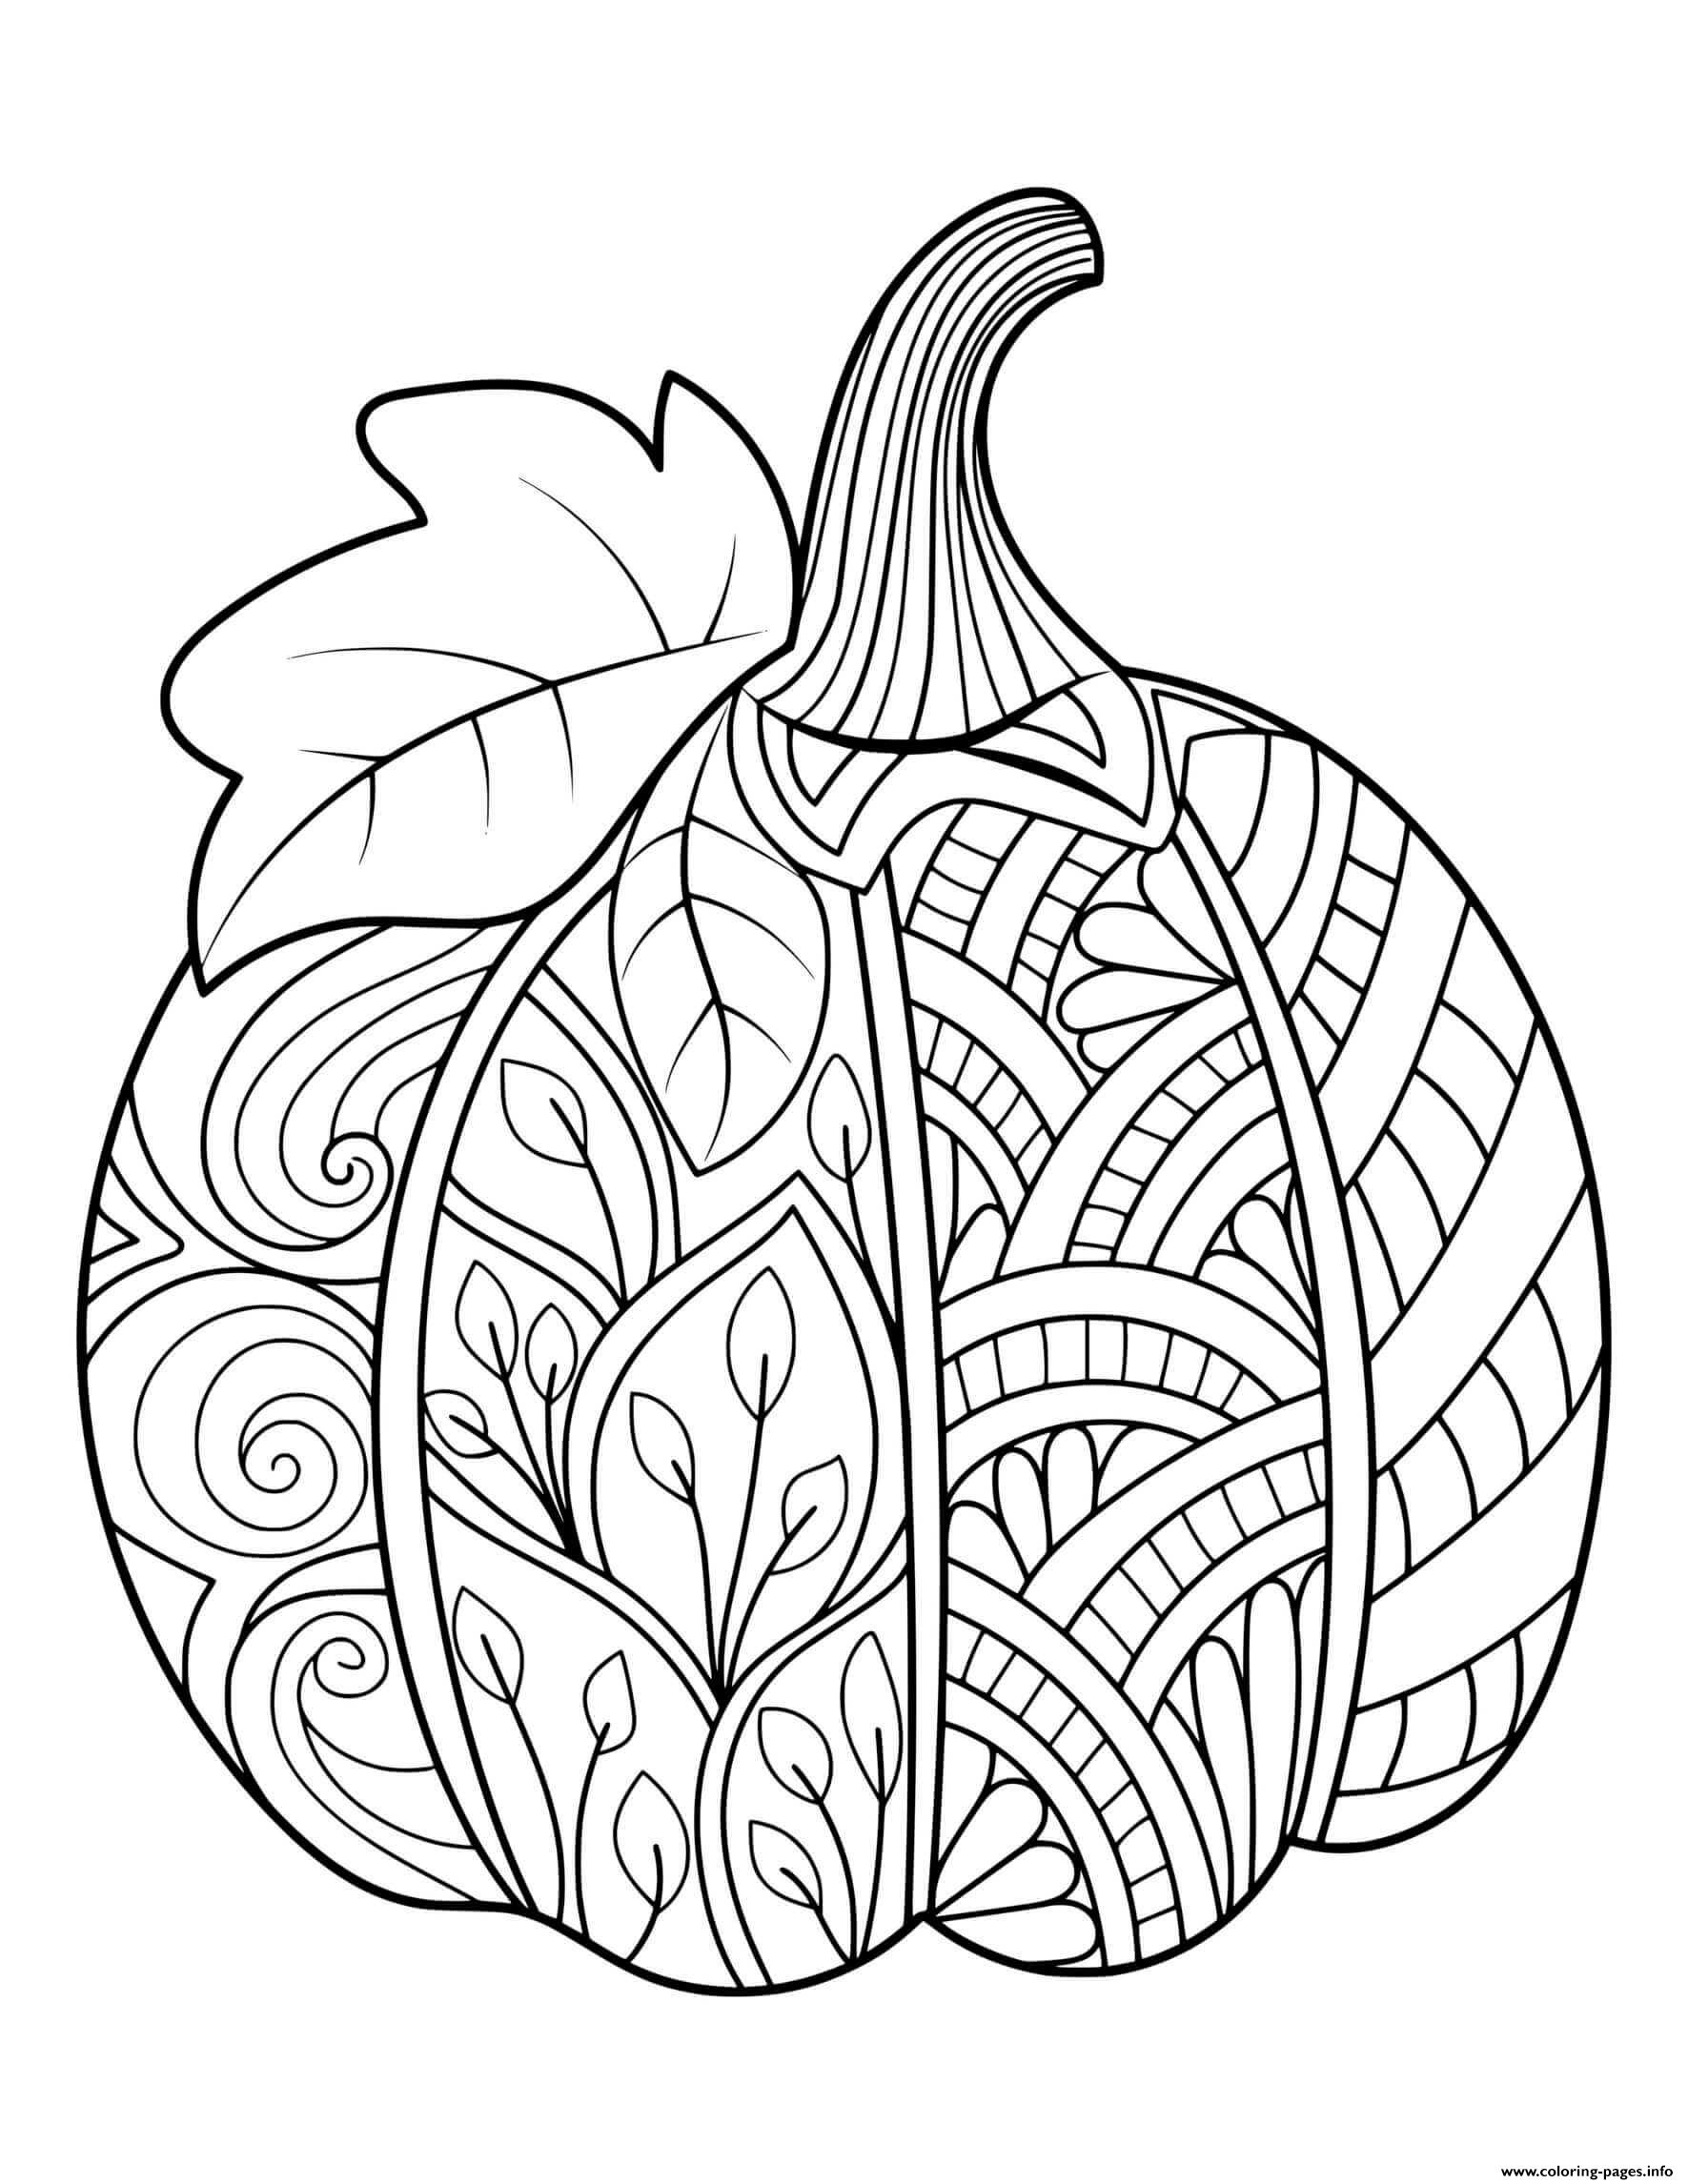 Pumpkin Decorative Patterned Pumpkin With Leaf Coloring Page Printable